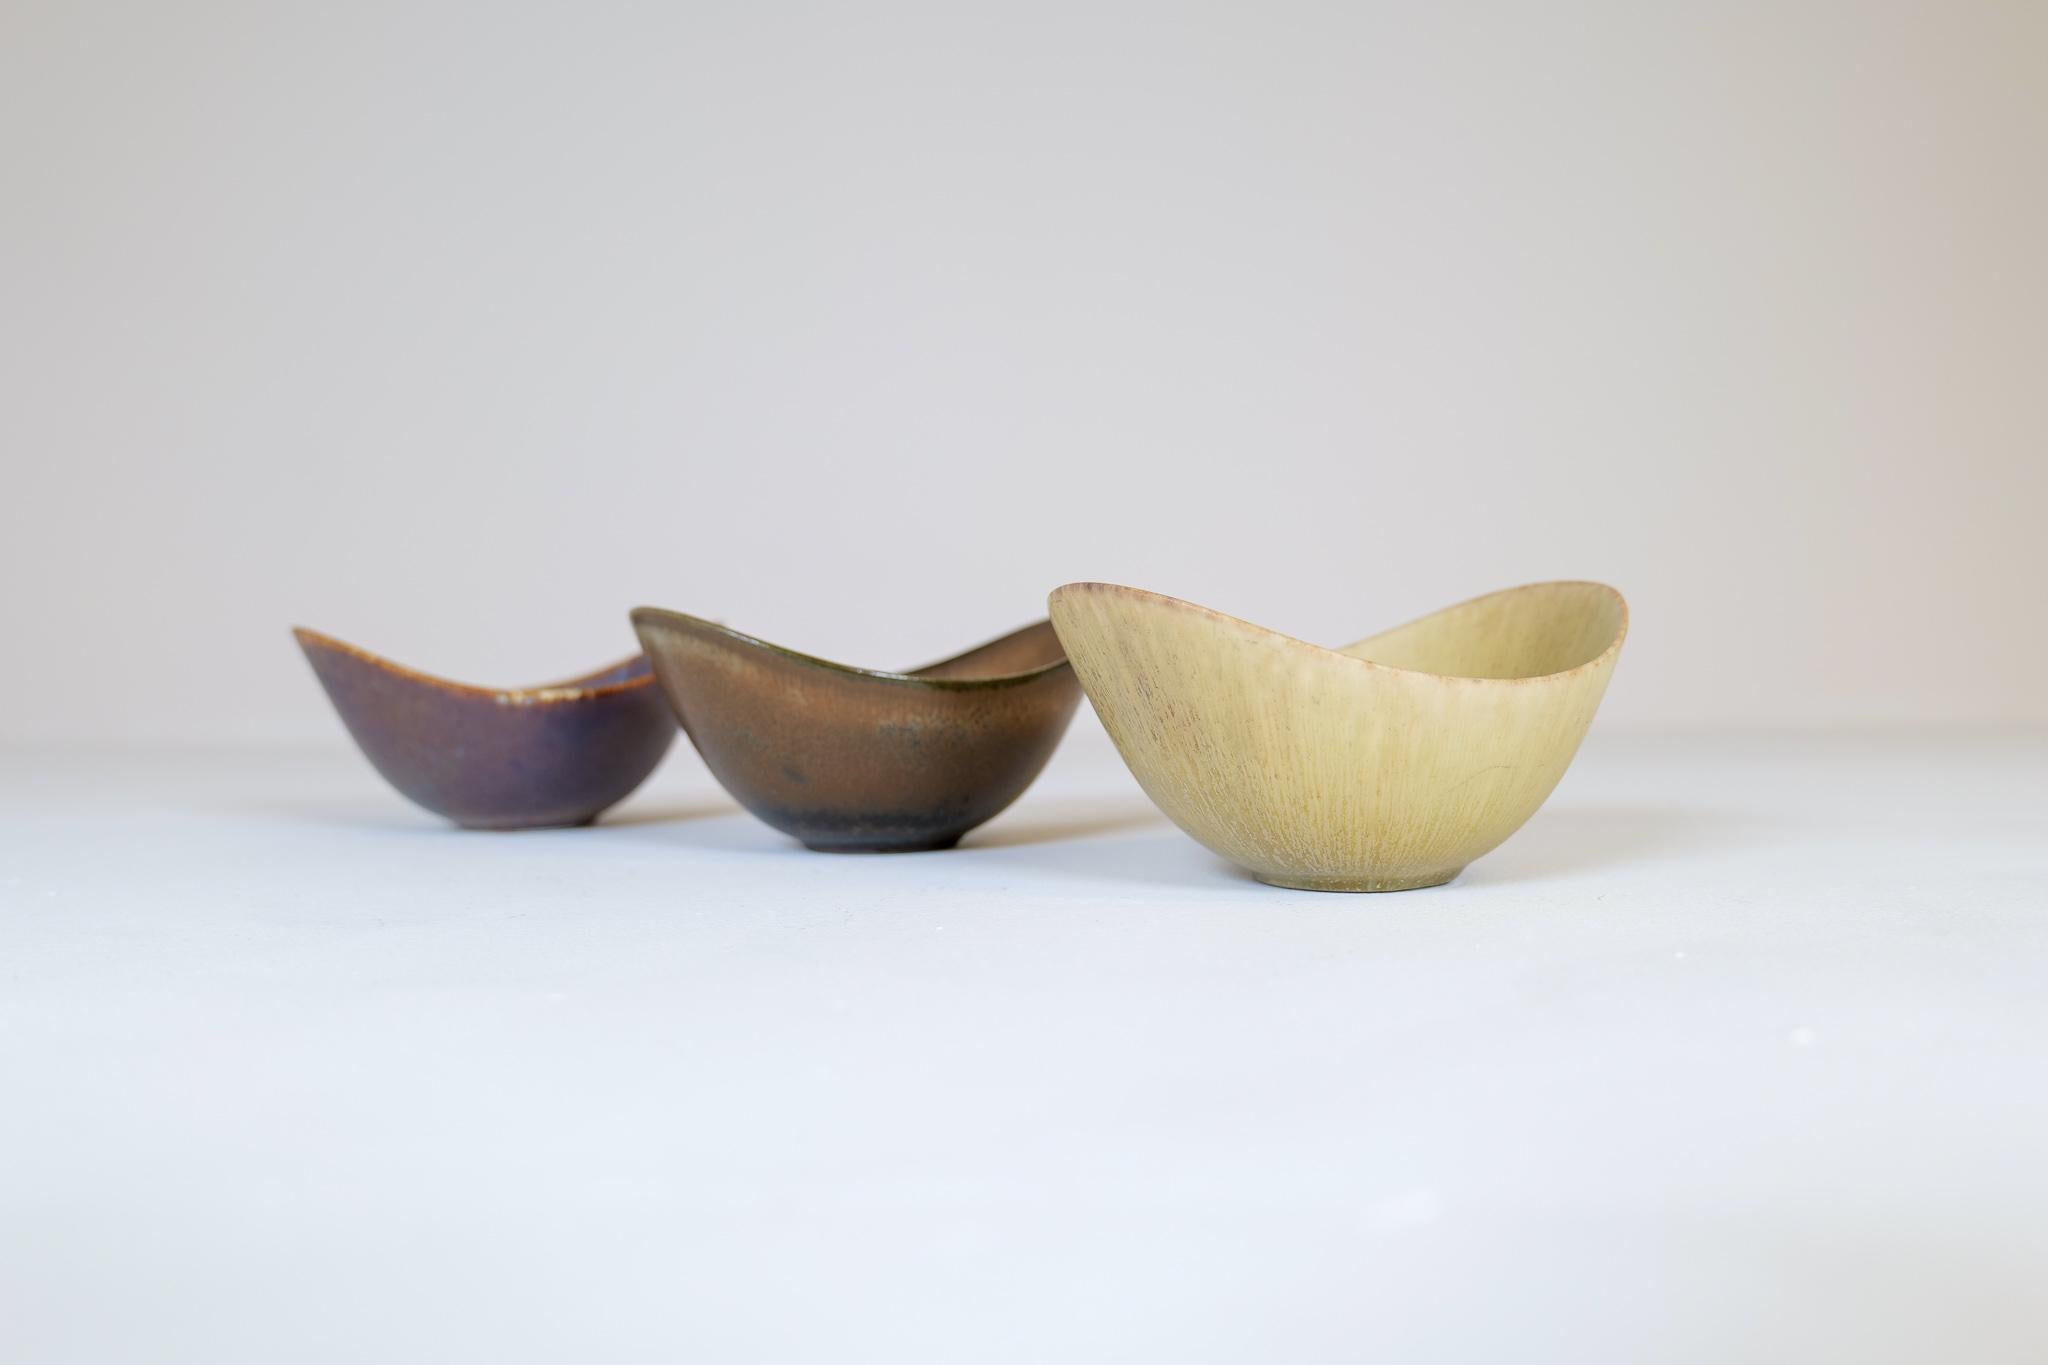 This wonderful collection of 3 ARO bowls was created and designed by Gunnar Nylund at the Rörstrand Factory in the 1950s, Sweden.

The glaze is amazing and works with the articulate form of the bowls.

Good condition.

Measures: W 16, D 12,5 H